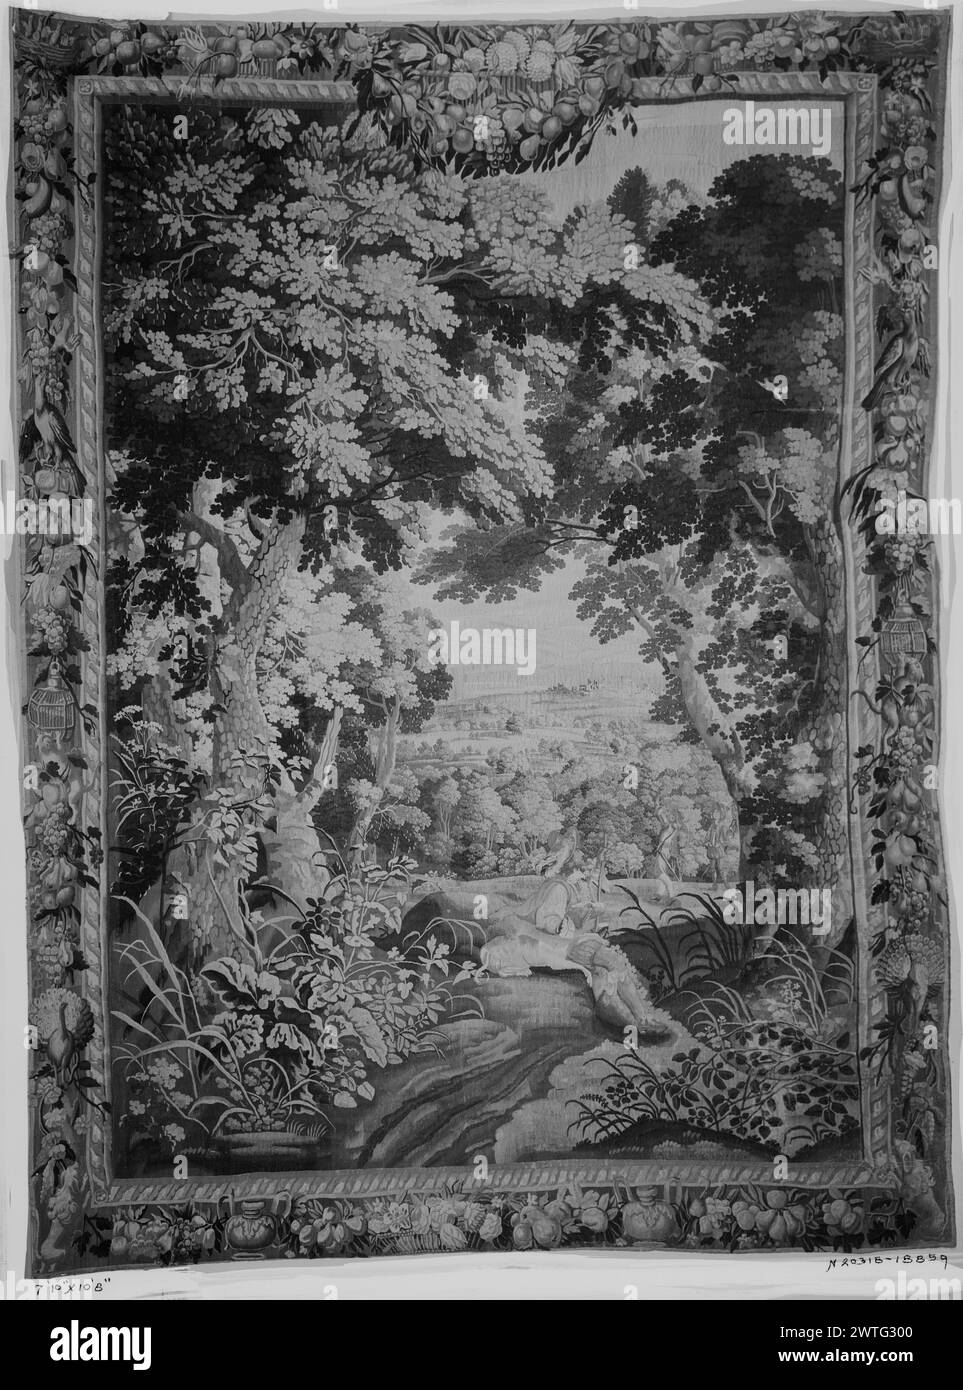 Landscape with hunter and hound resting. unknown c. 1660-1680 Tapestry Dimensions: H 10'8' x W 7'10' Tapestry Materials/Techniques: unknown Culture: Flemish Weaving Center: unknown Ownership History: French & Co. purchased from R. W. Bliss, invoiced 3/8/1937; sold to Mrs. C. Gerngross, 10/22/1938. Stock Photo